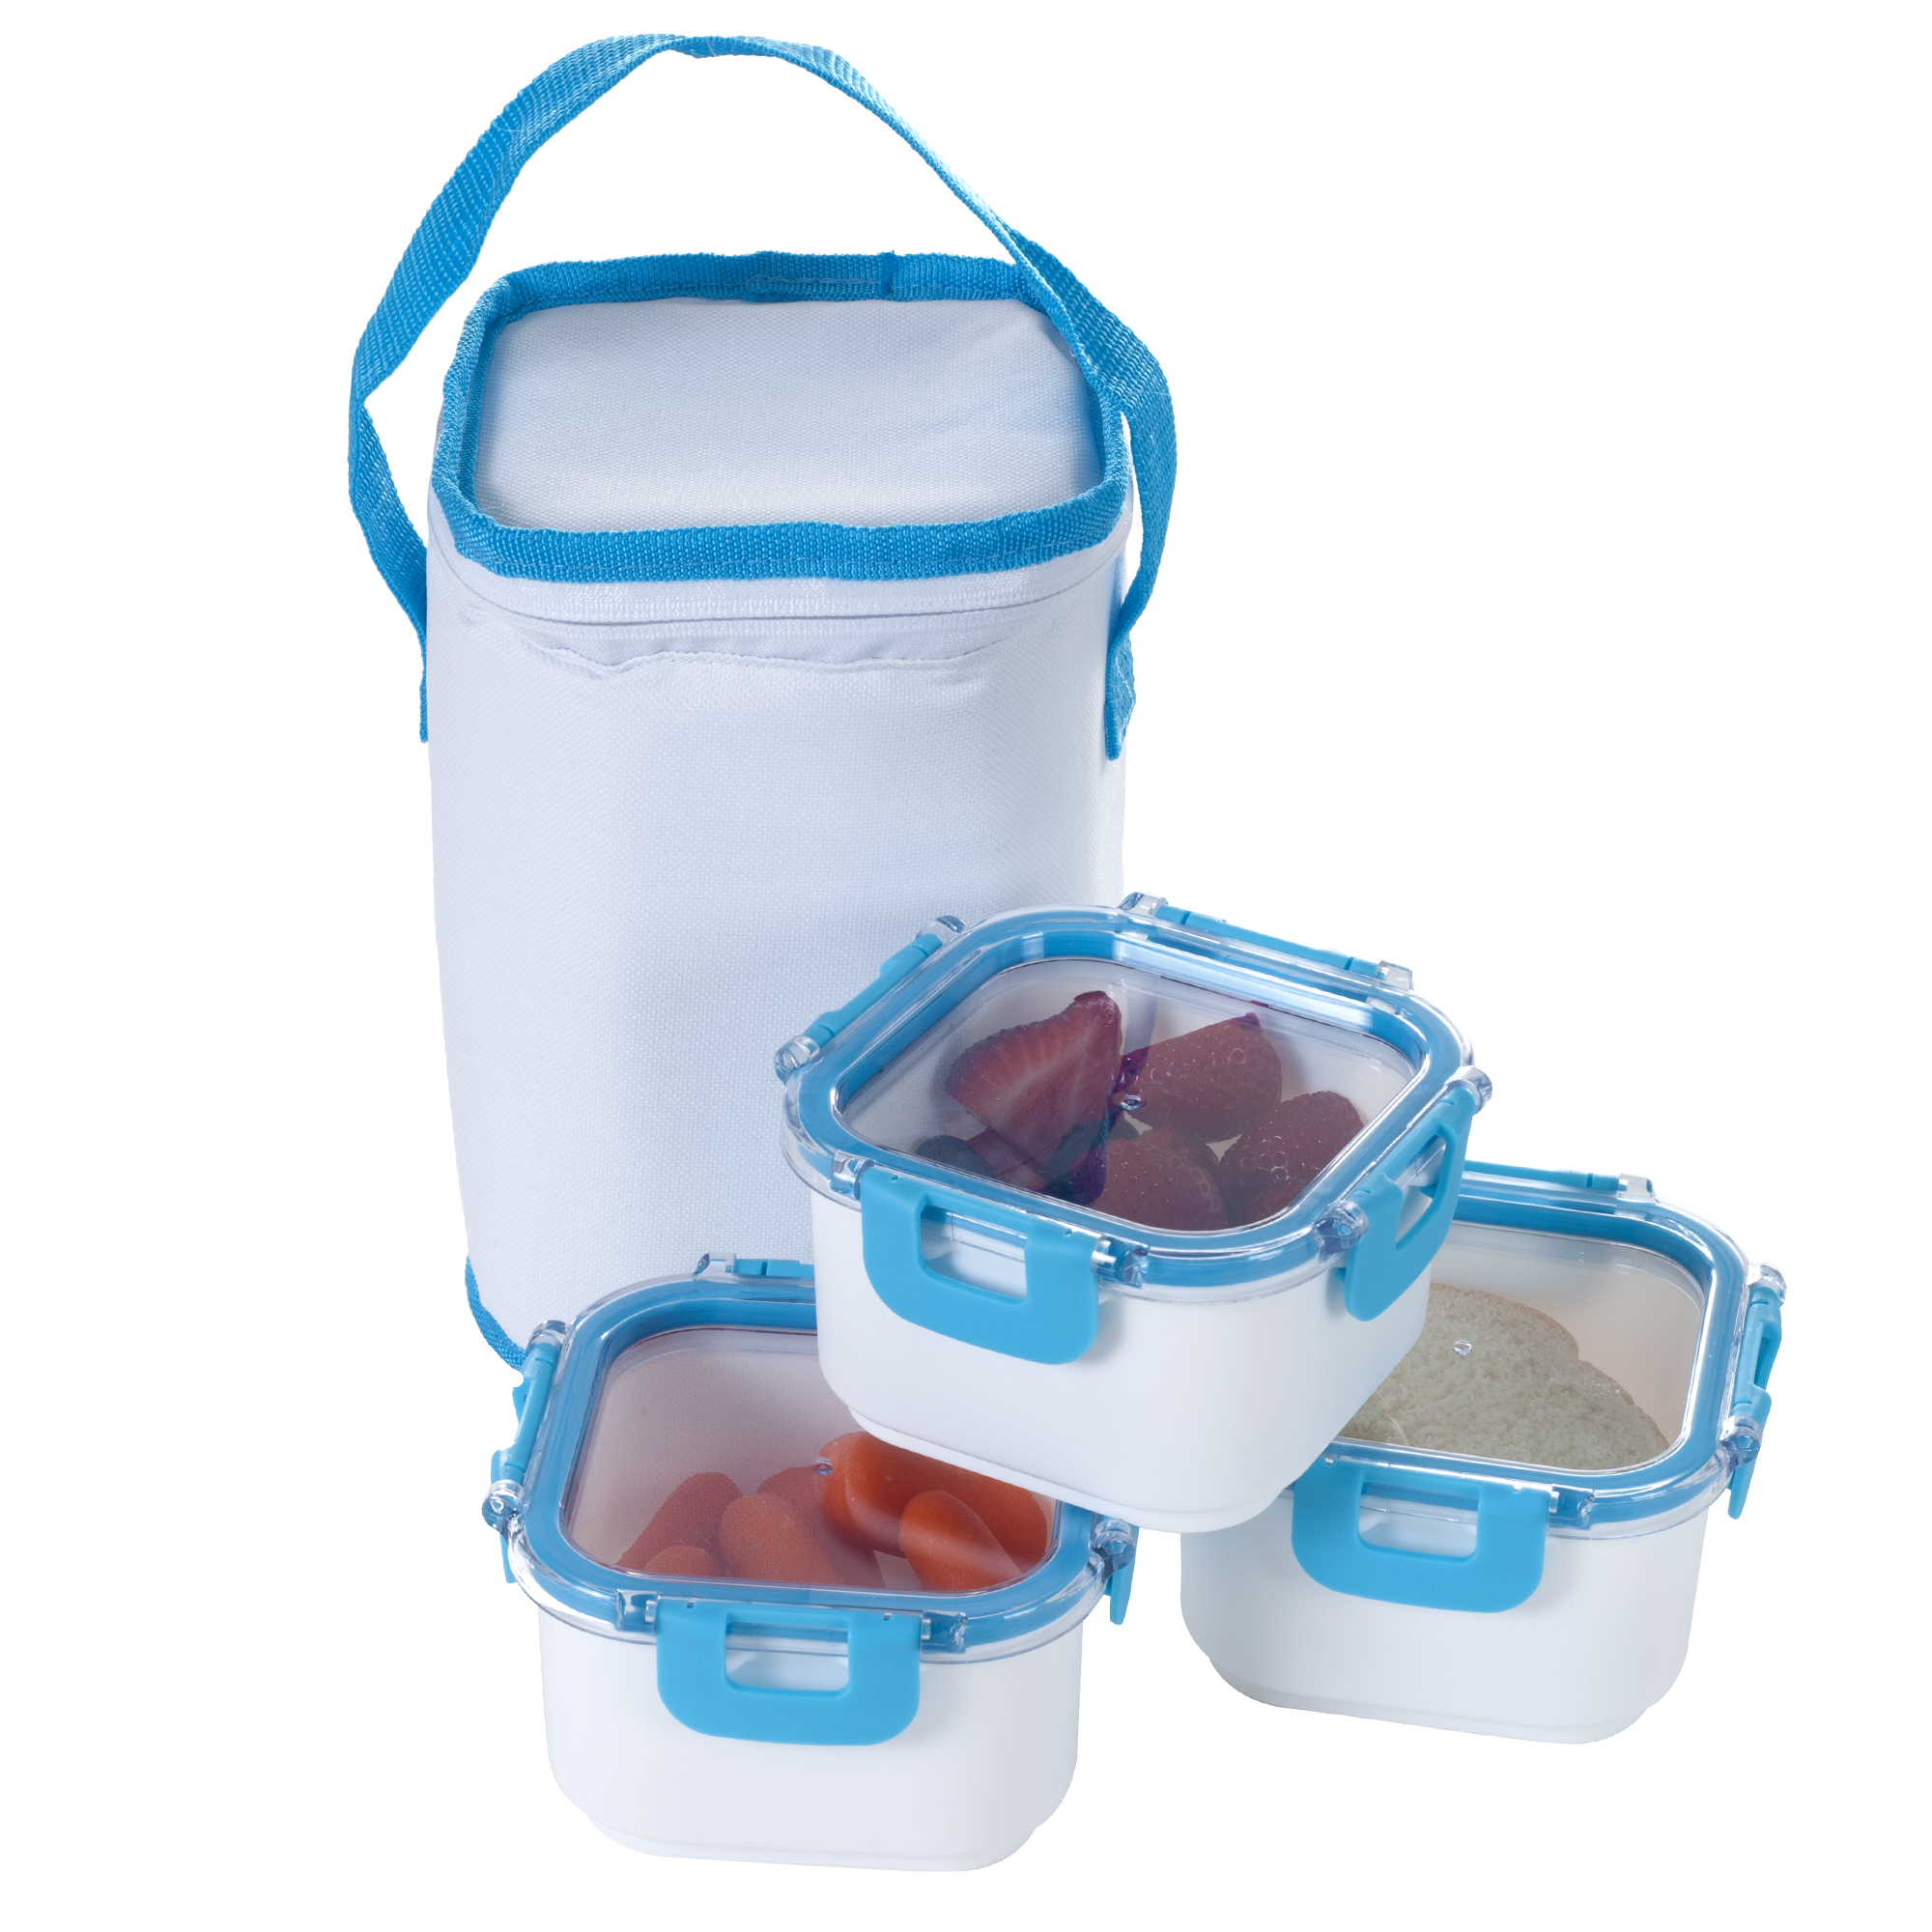 Classic Cuisine Portable 3 Piece Food Storage Set with Insulated Bag